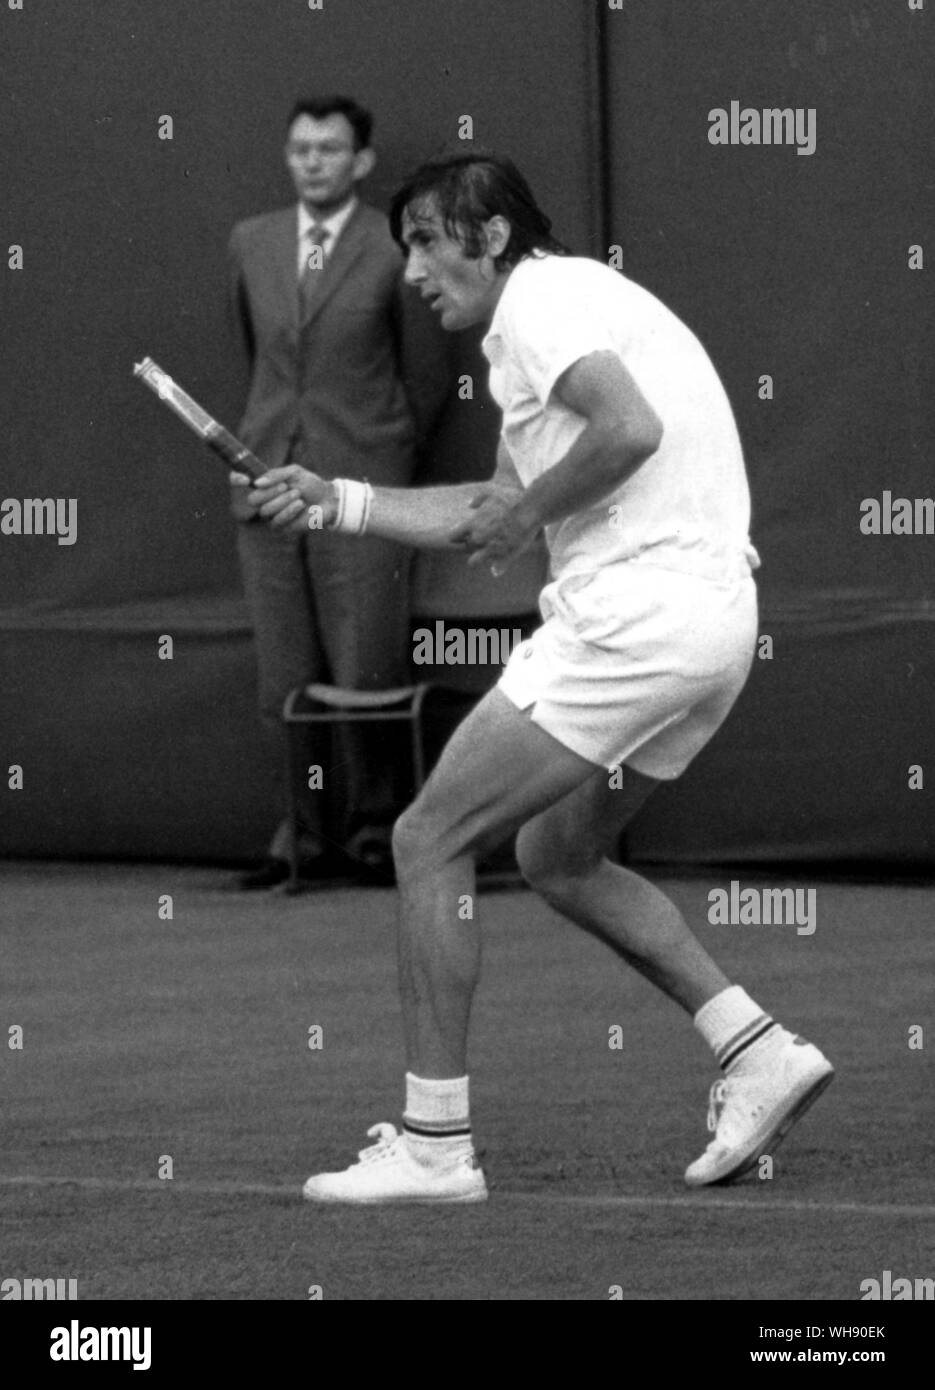 A lucky shot - Ile Nastase on an outside court at Wimbledon 1971, was playing forehand from the baseline and the head of the racket broke on impact and flew into the net. Nastase, still finishing the stroke, holds only the stem. Stock Photo